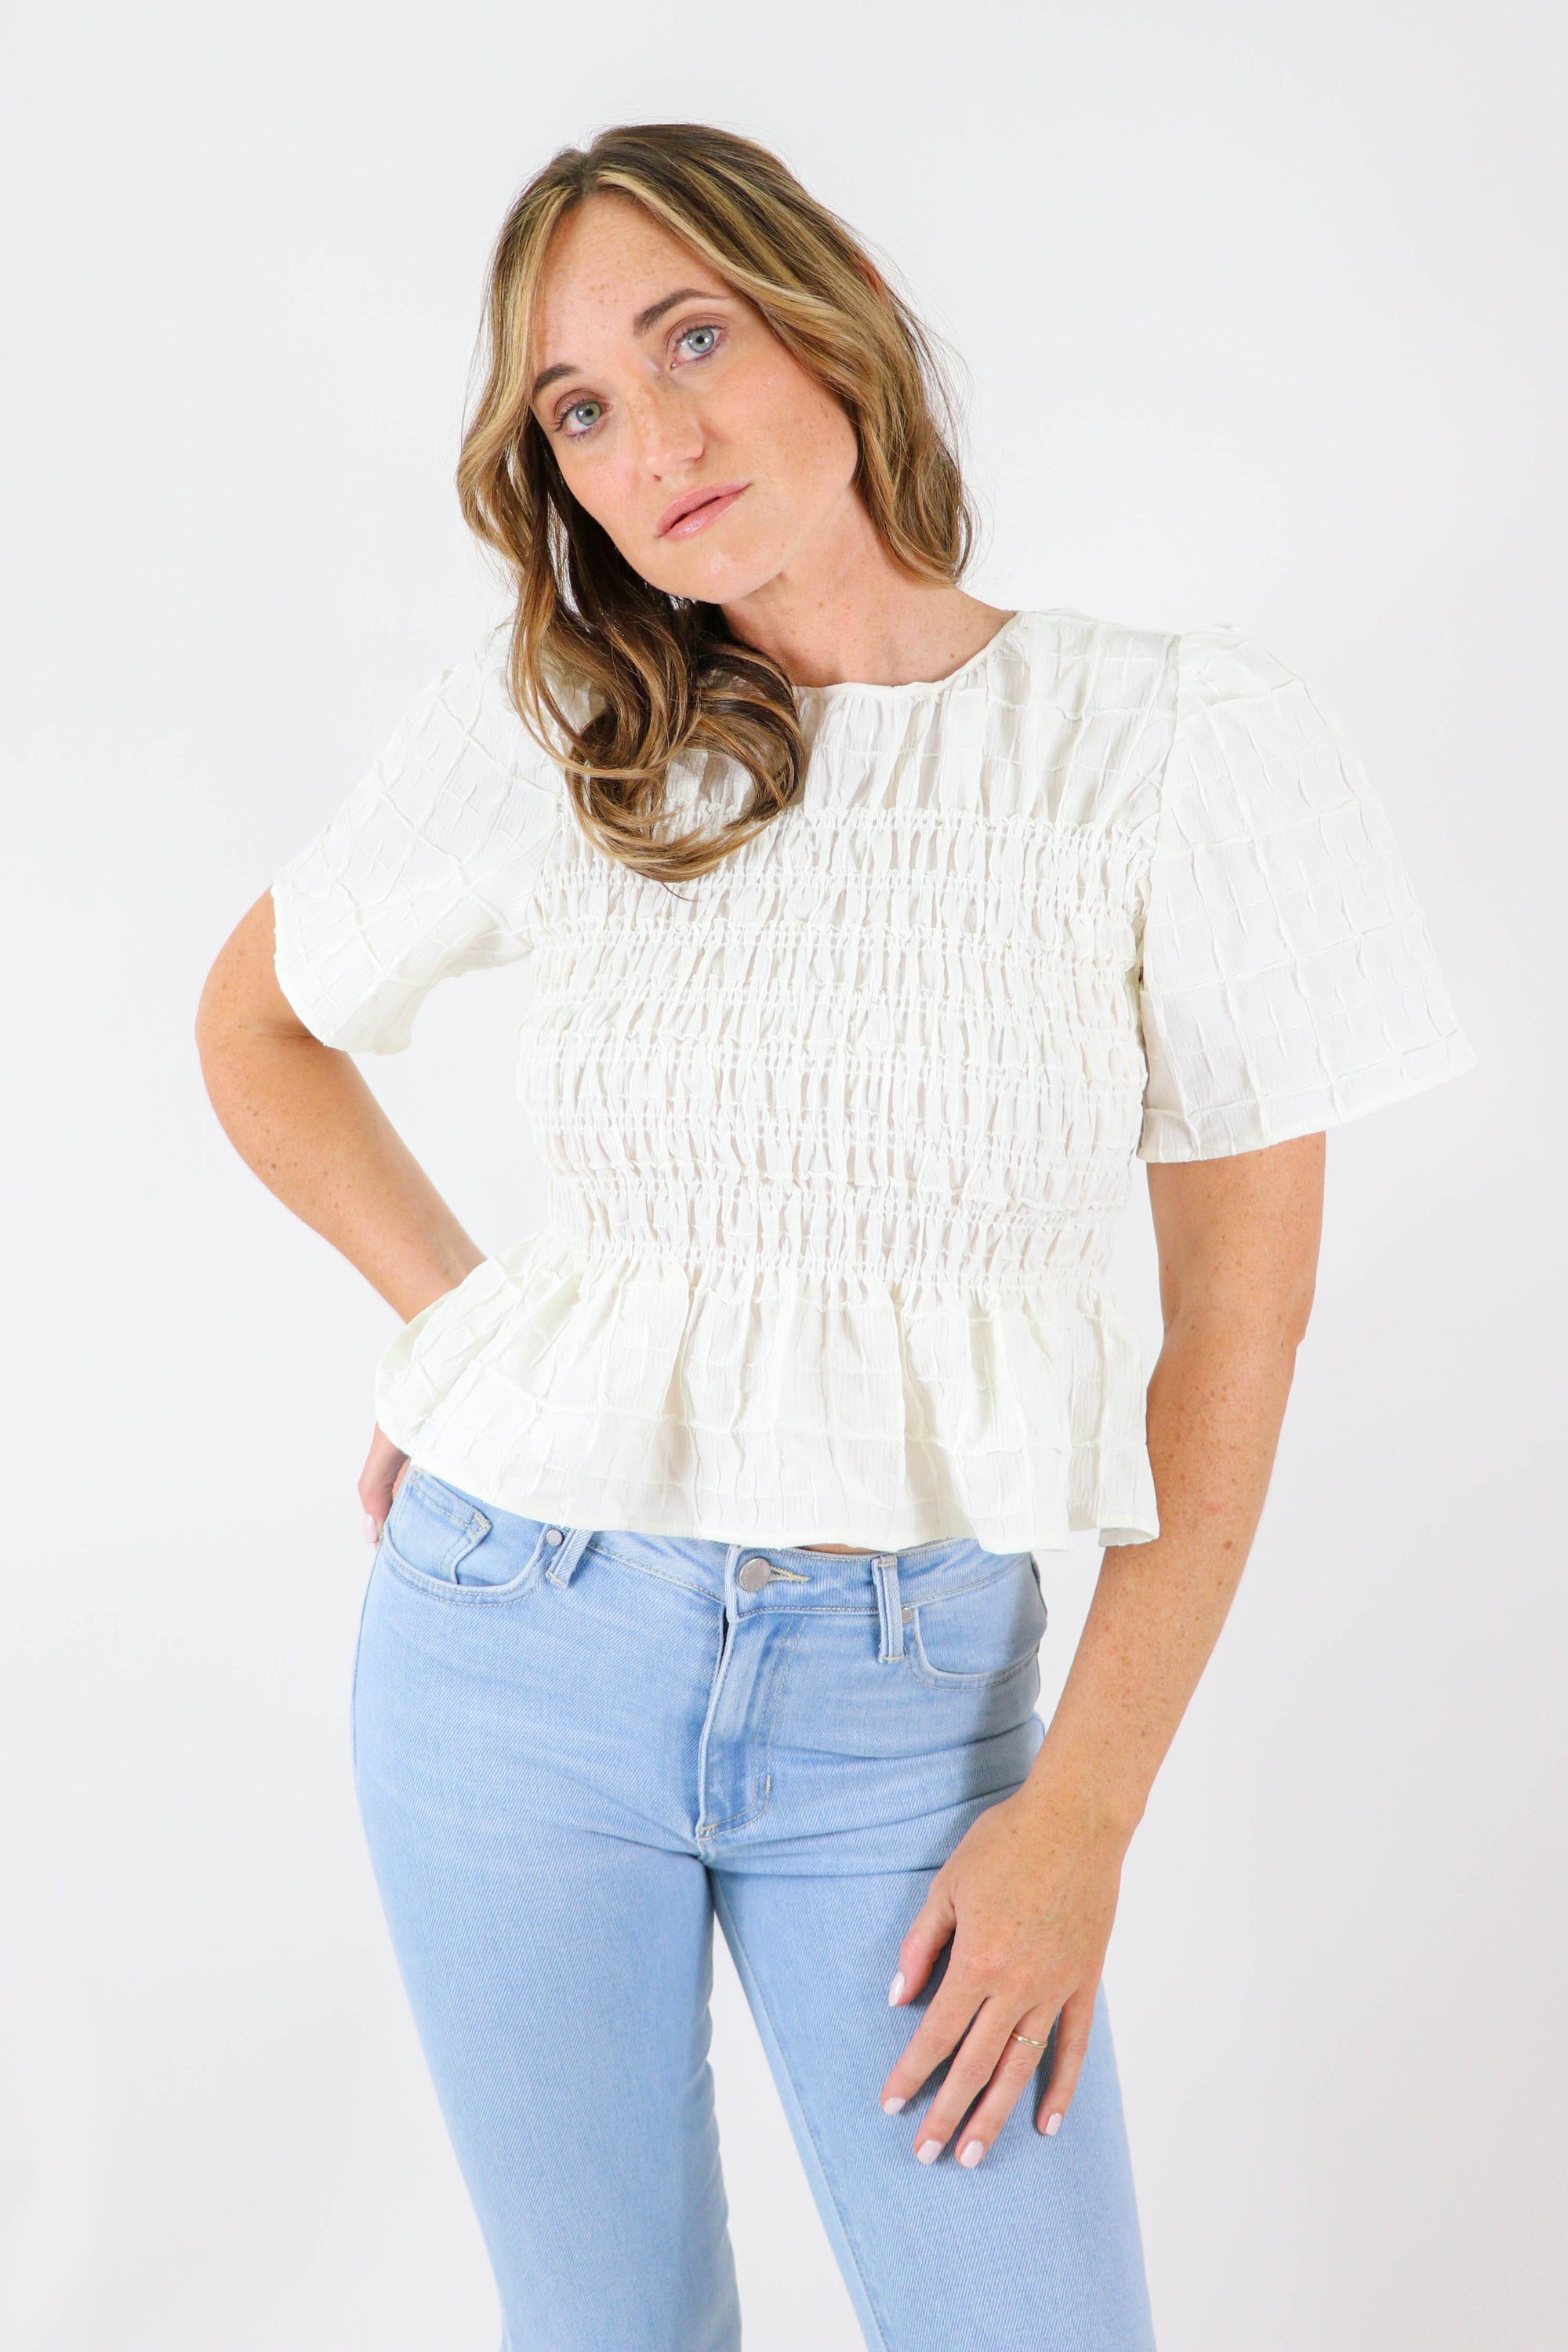 MIOU MUSE Smocked Peplum Top | Sweetest Stitch Women's Boutique